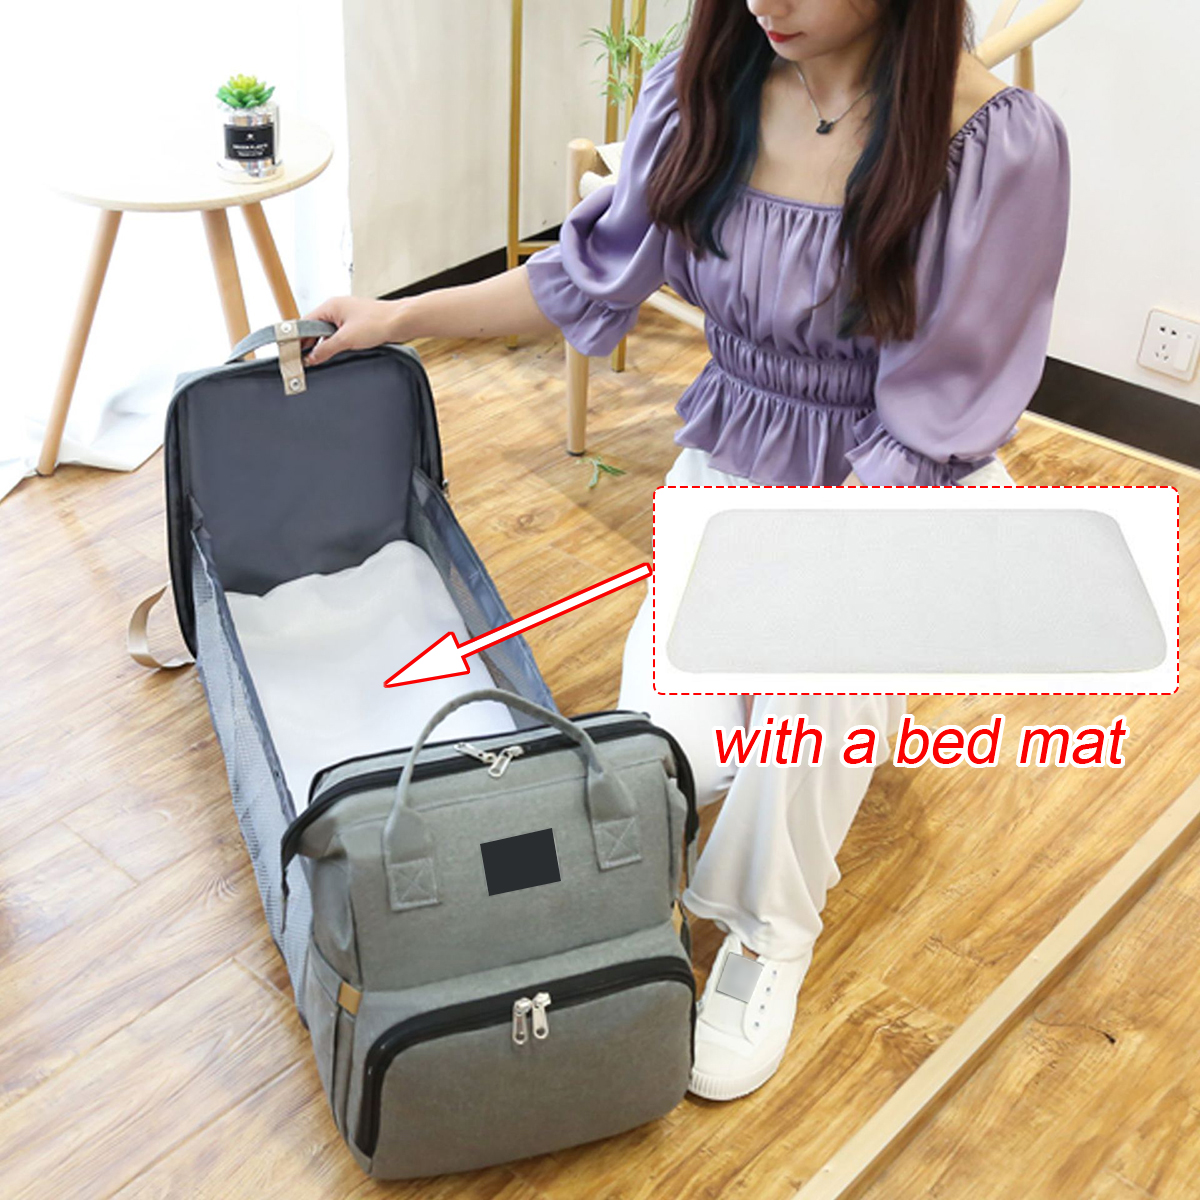 2-in-1-Diaper-Bag-with-Changing-Station-Mom-Backpack-Multifunctional-Baby-Bed-Crib-Handbag-Stroller--1915792-4